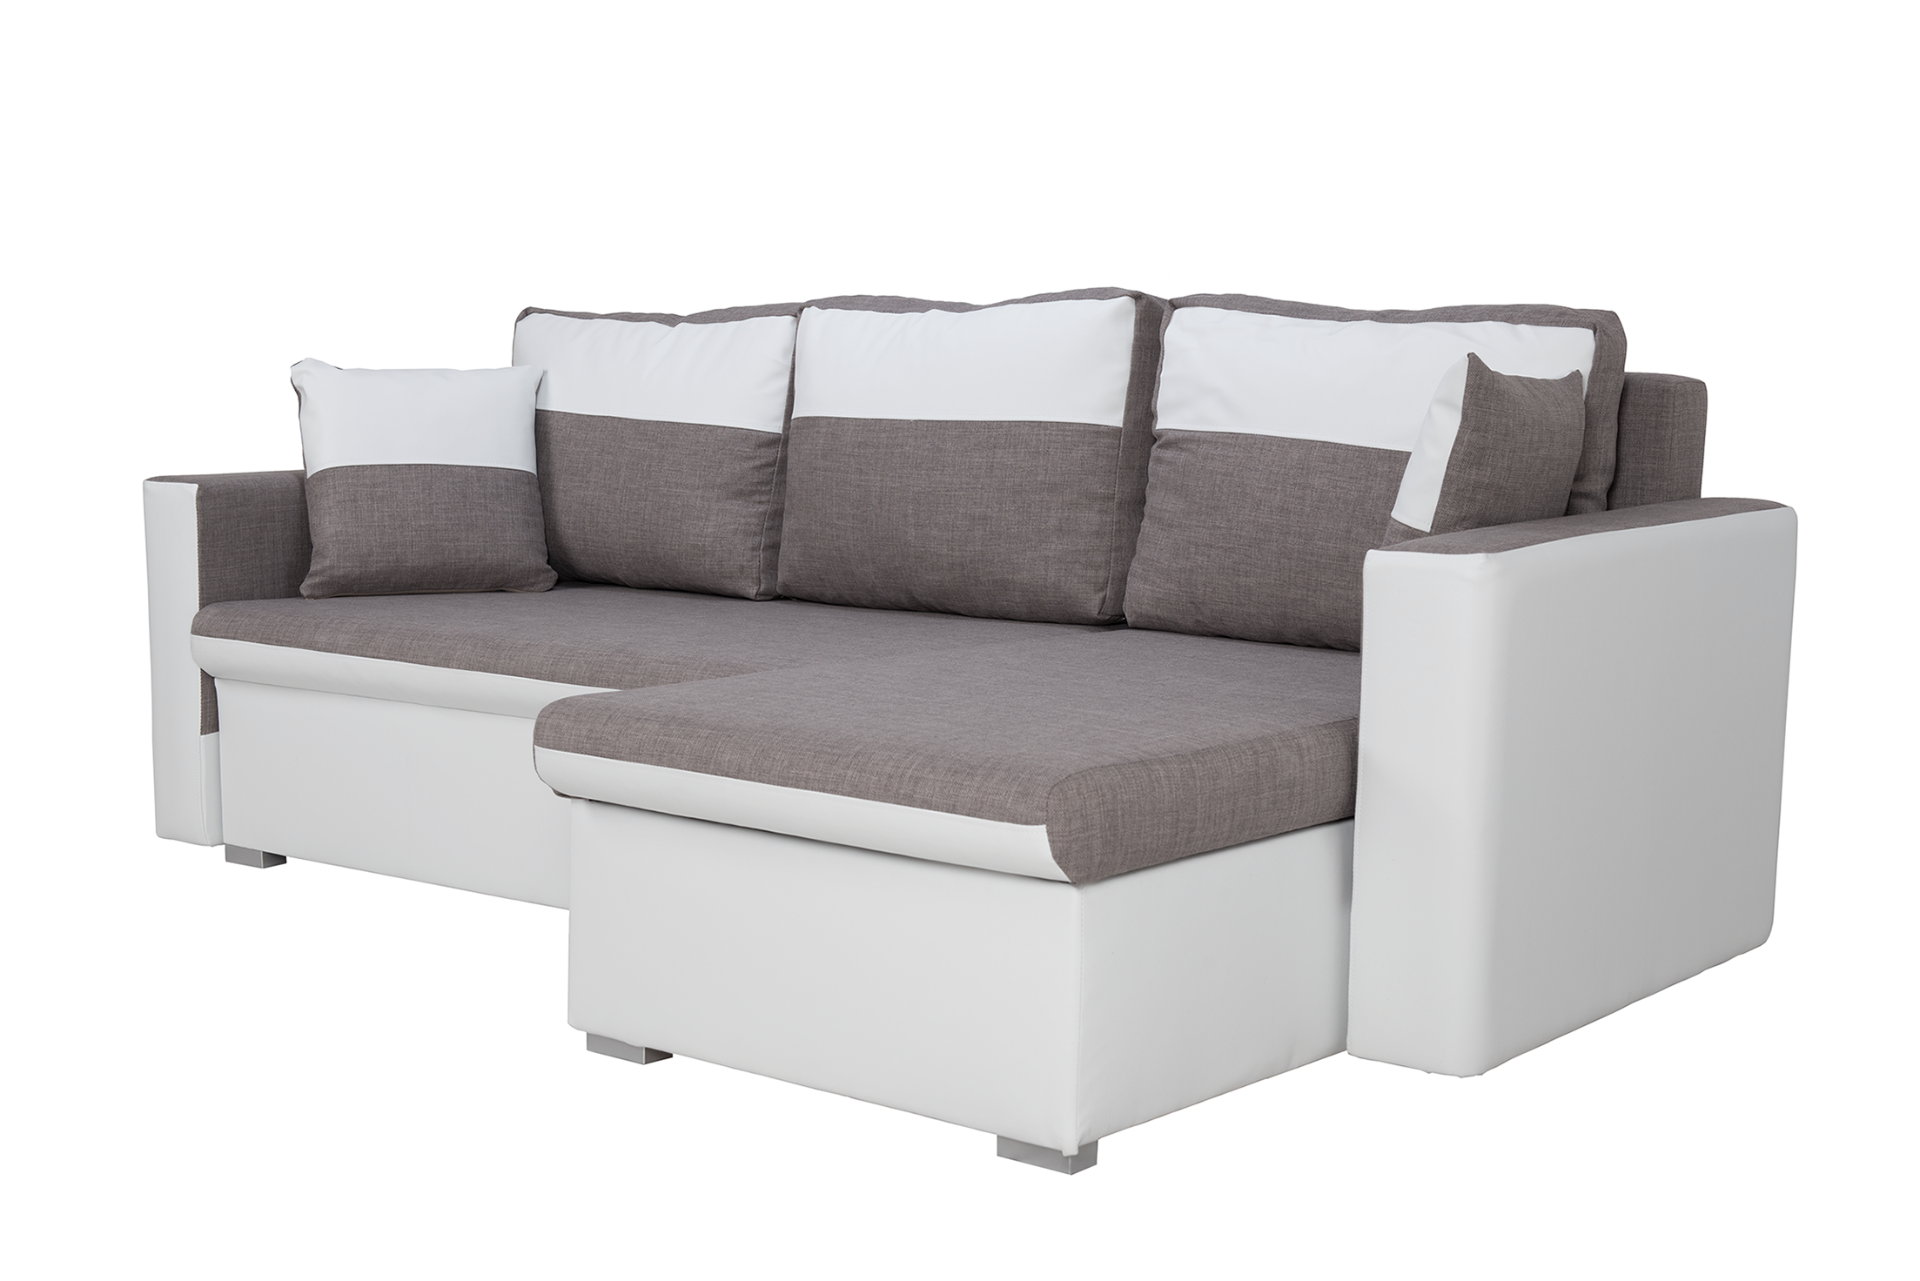 Brand New Flˆvio Right Hand Facing White/Grey Corner Pull Out Sofa Bed With Storage - Image 3 of 3